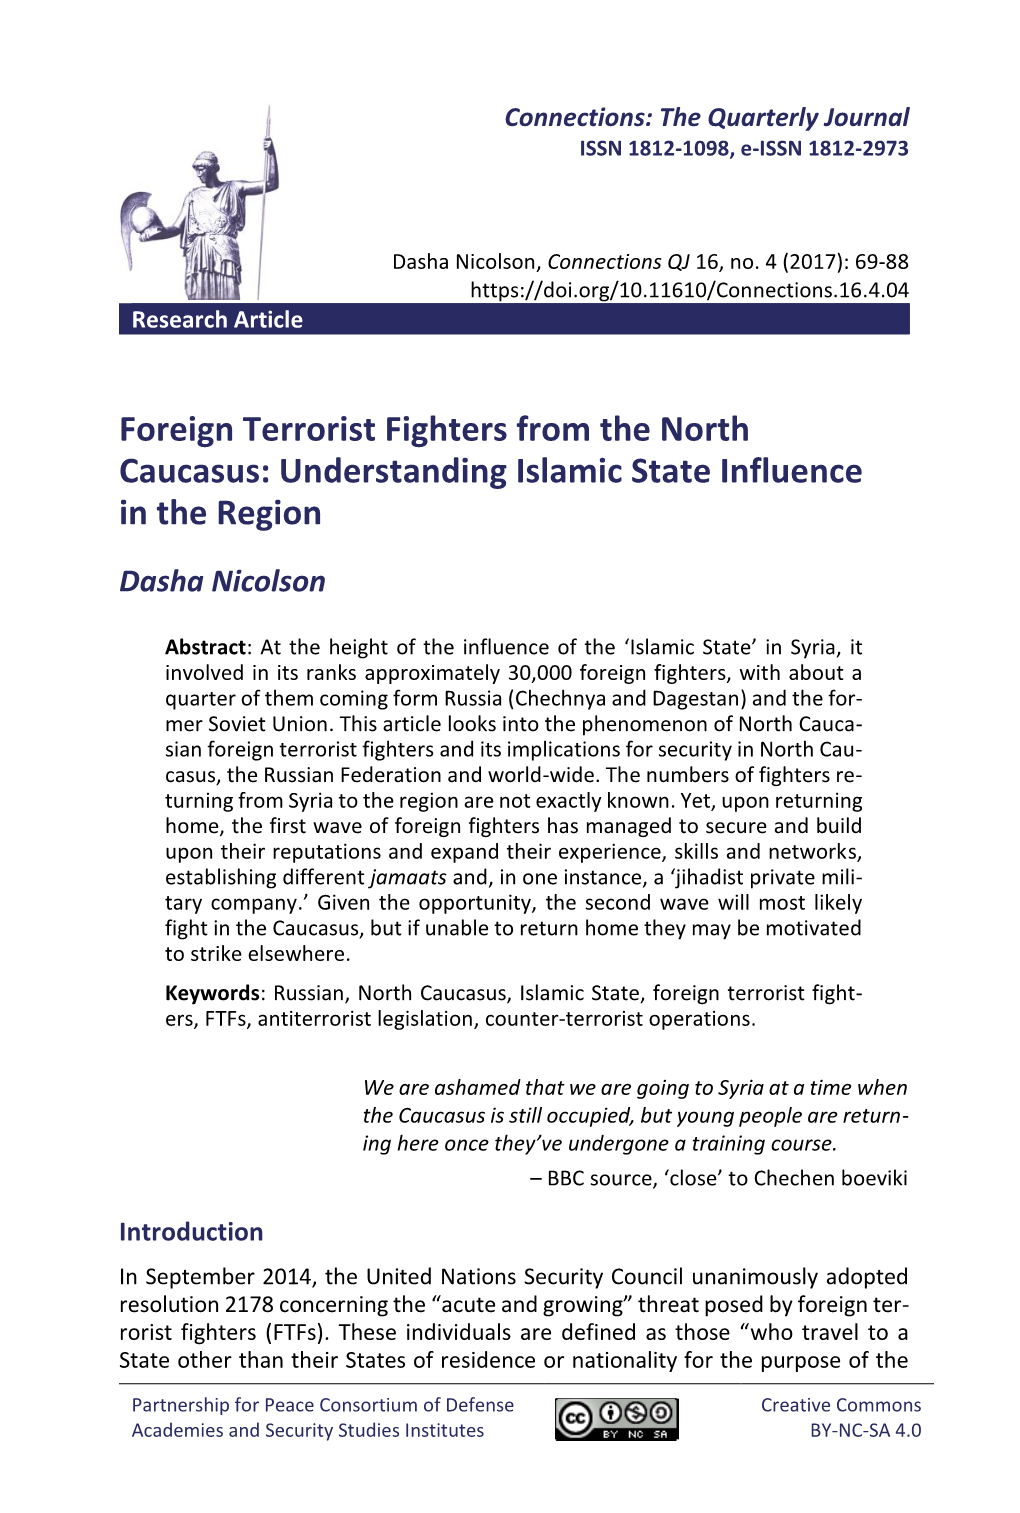 Foreign Terrorist Fighters from the North Caucasus: Understanding Islamic State Influence in the Region